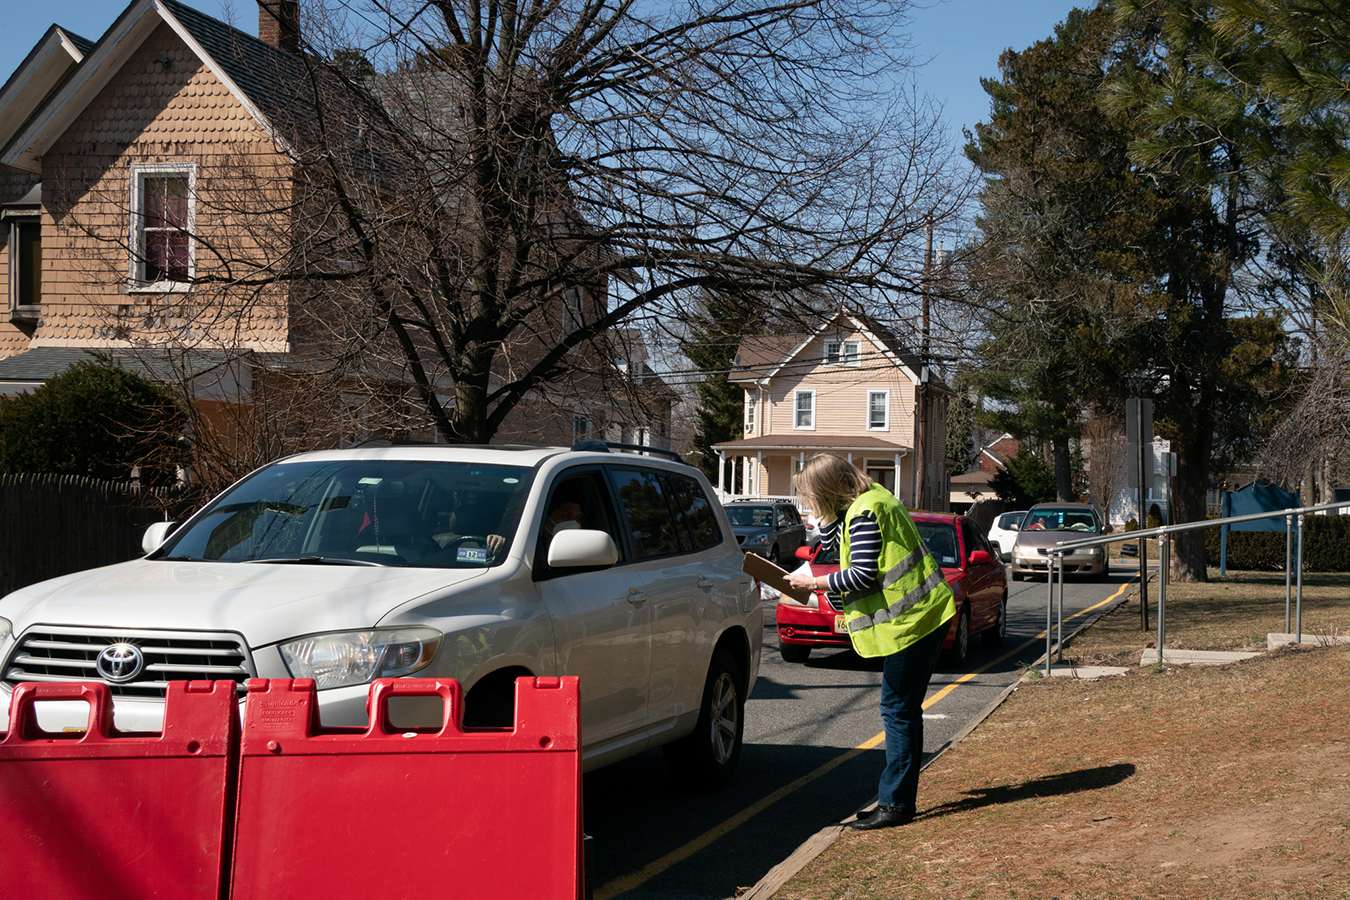 A food pantry volunteer collects information from a driver